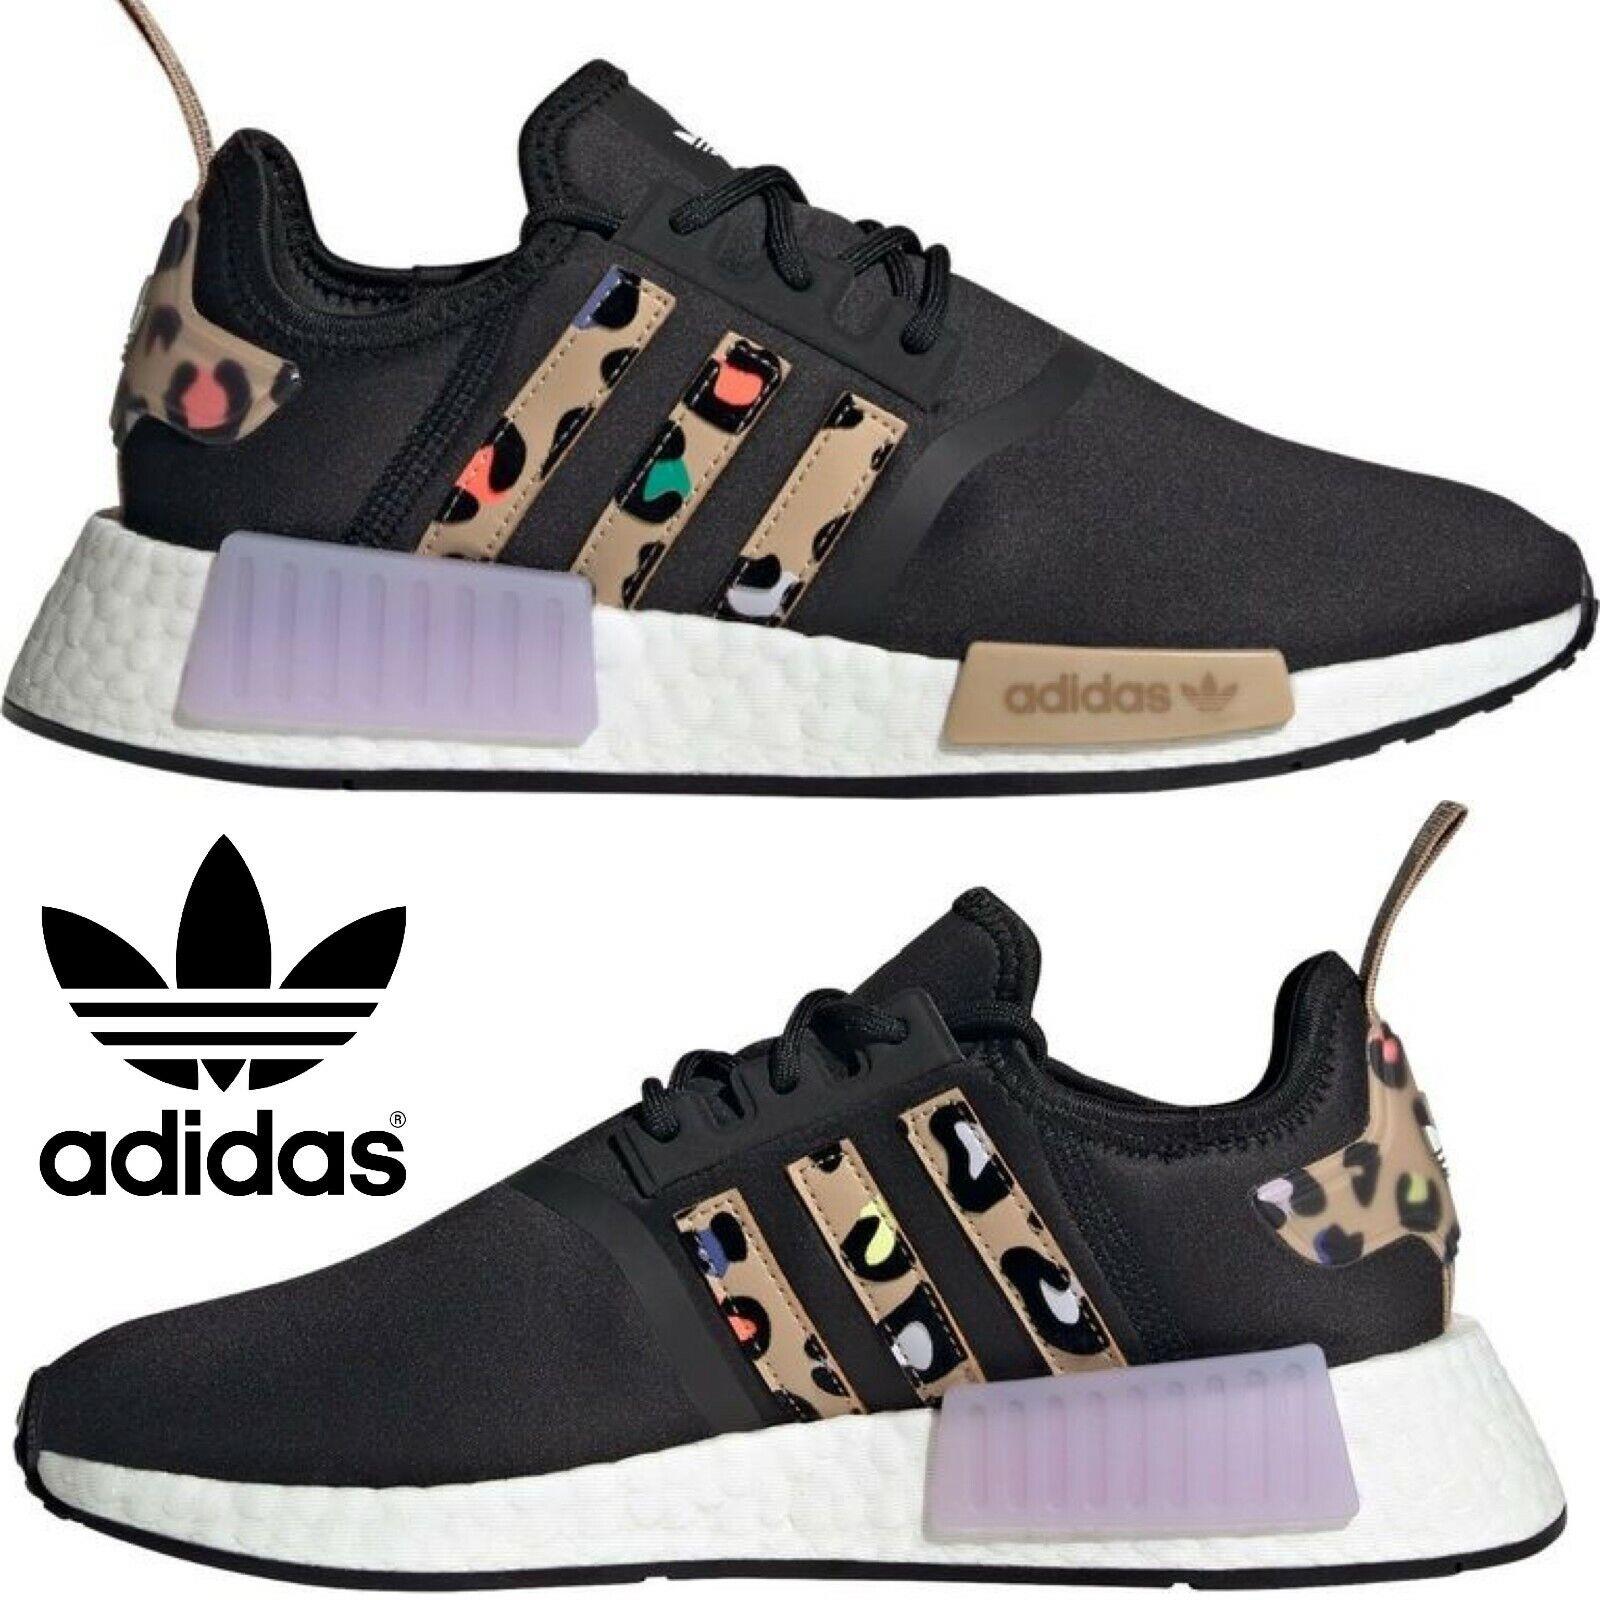 Adidas Originals Nmd R1 Women s Sneakers Casual Shoes Sport Gym Running Black